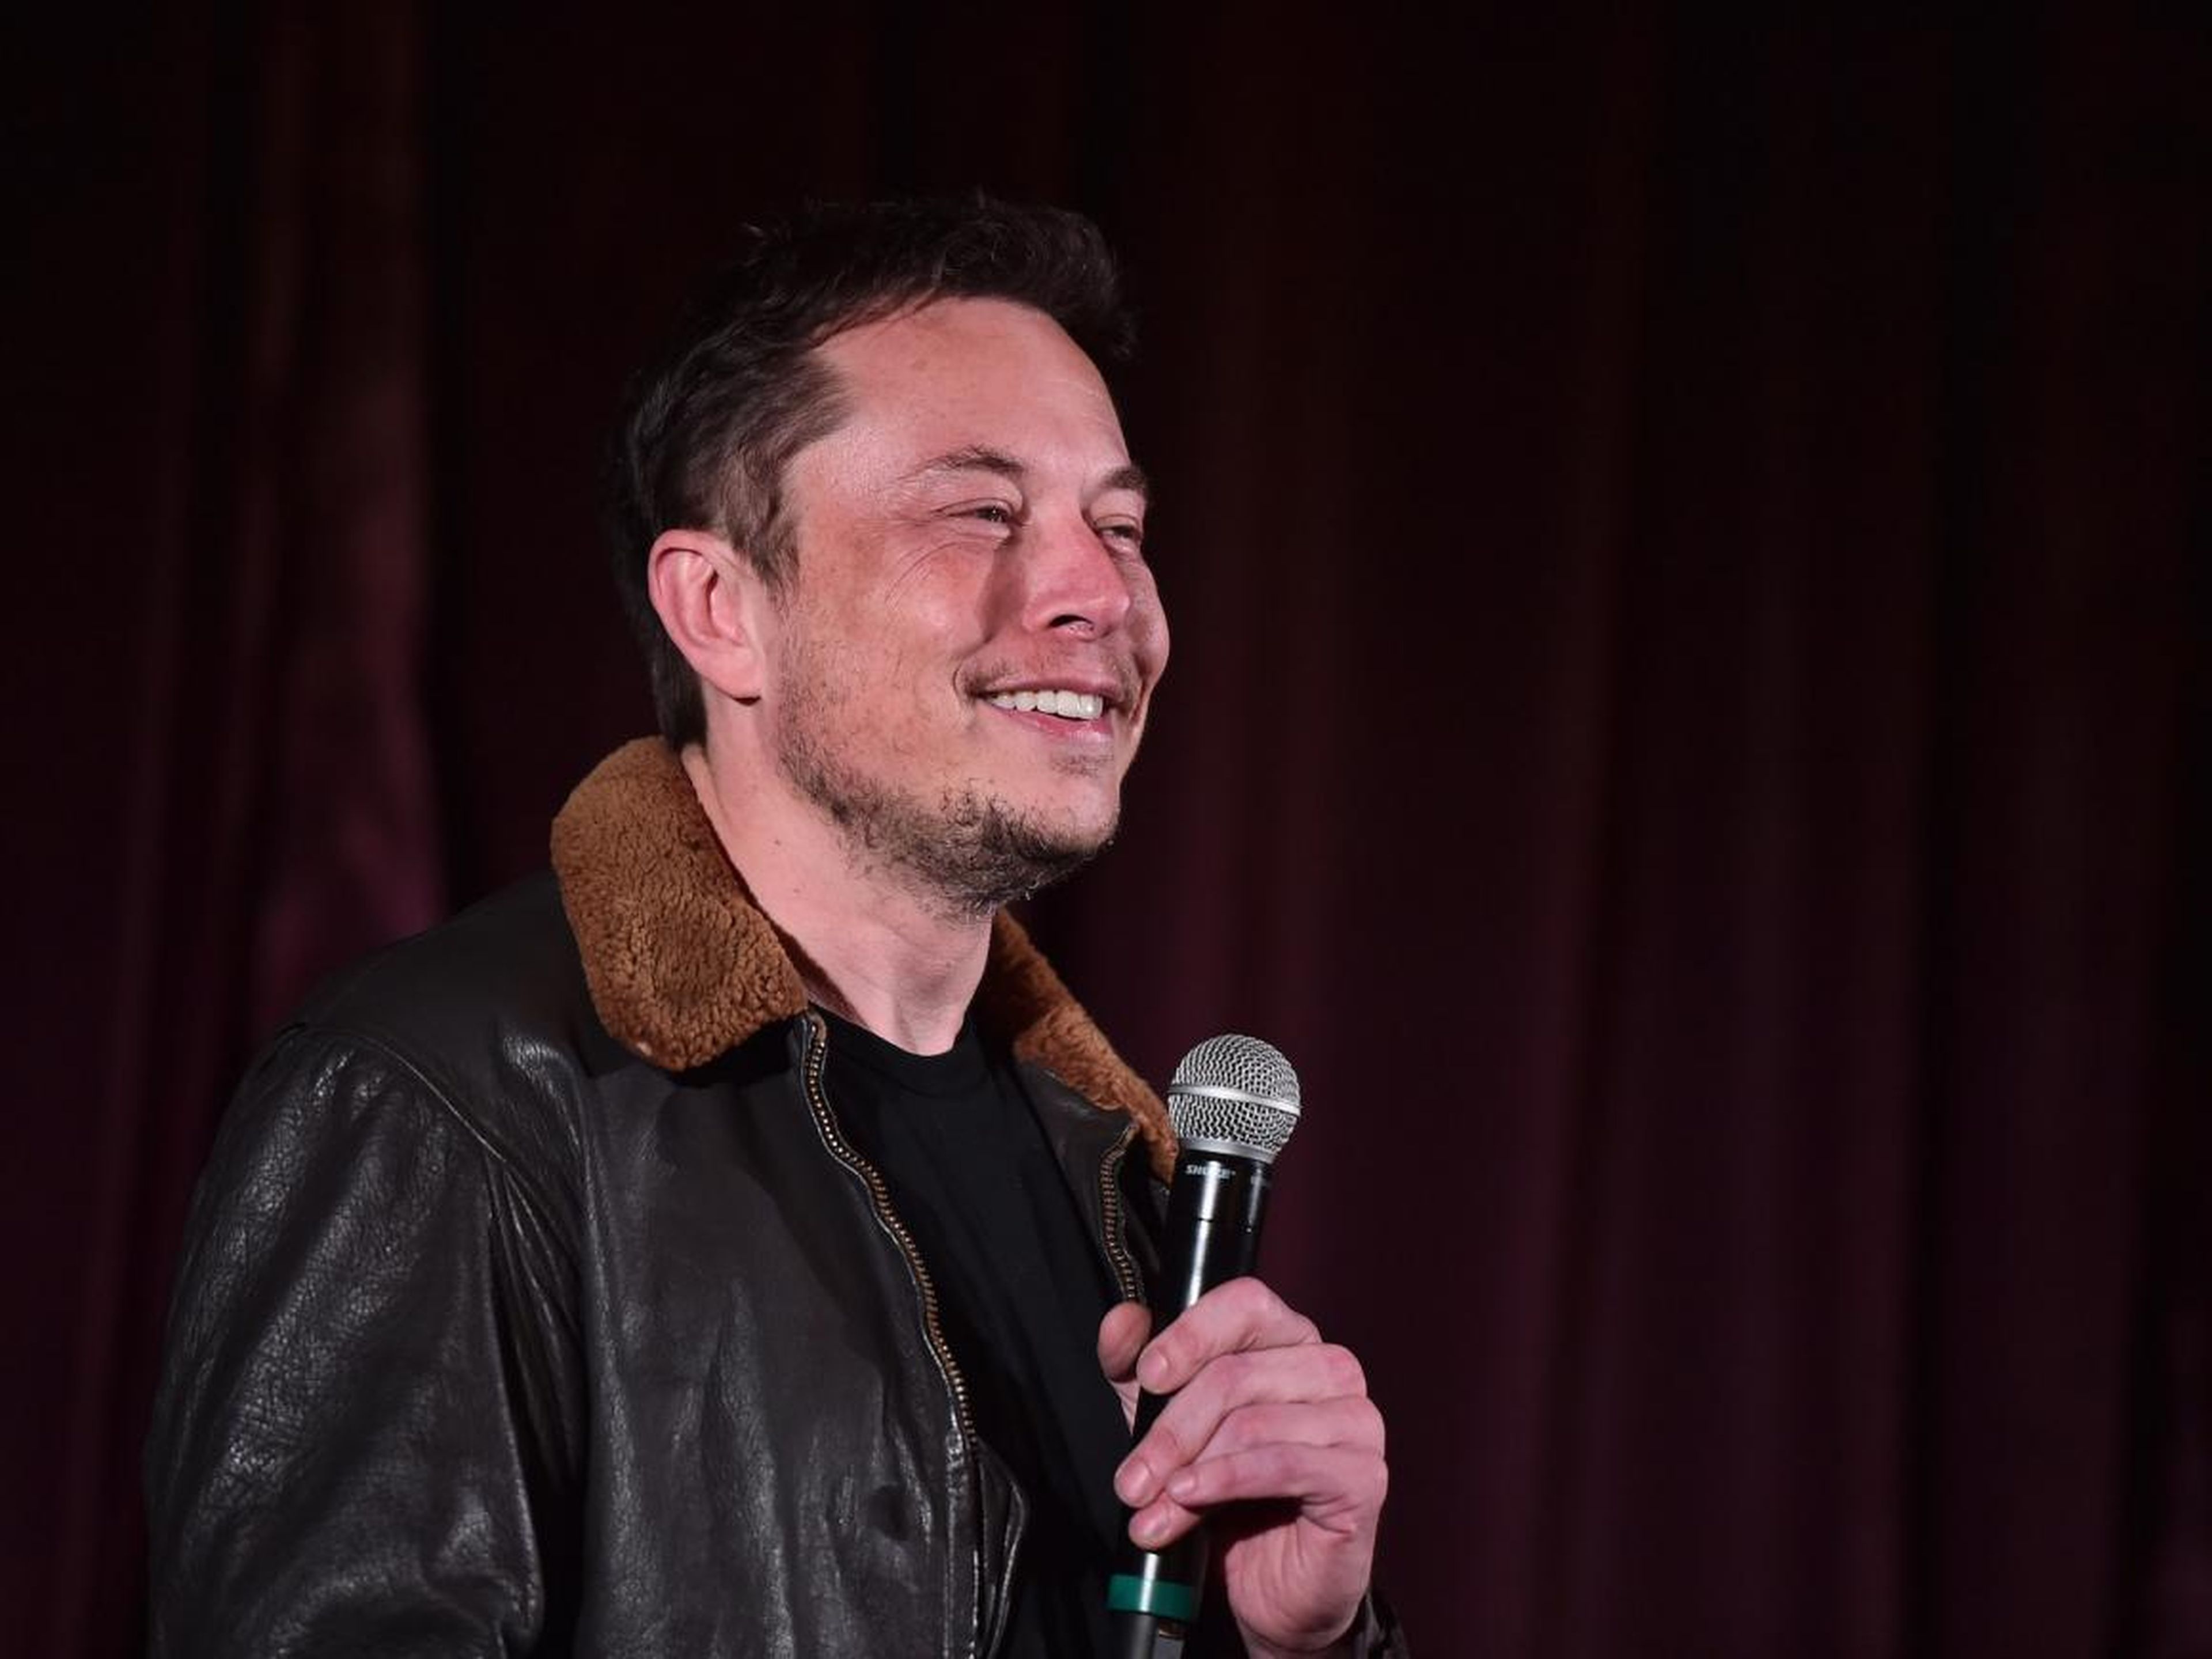 2018 seems to be looking up for Musk, though: While Model 3 production is still not quite on track, Tesla and SpaceX are both doing well. He's worth about $20 billion, all told — far from his days of being broke.